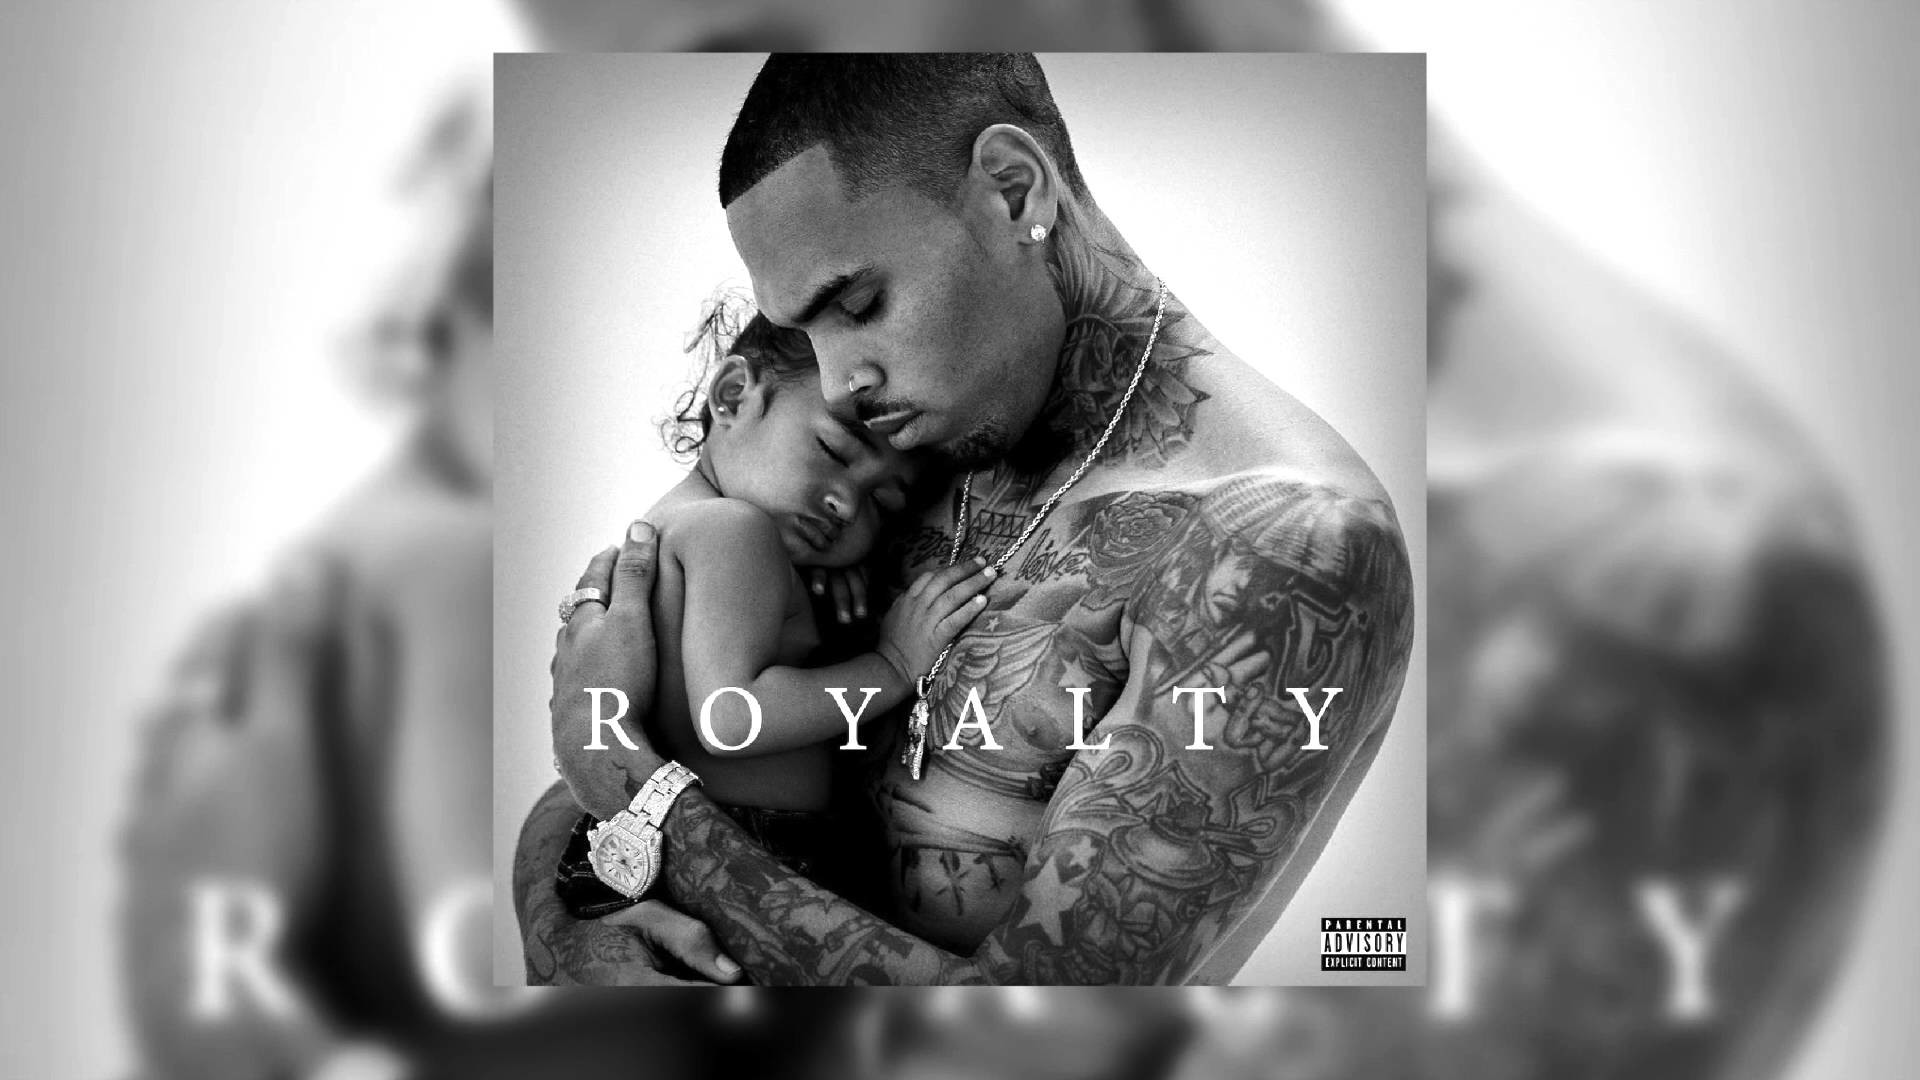 1920x1080 Royalty | Chris Brown Type Beat [Prod. By Dranzition]